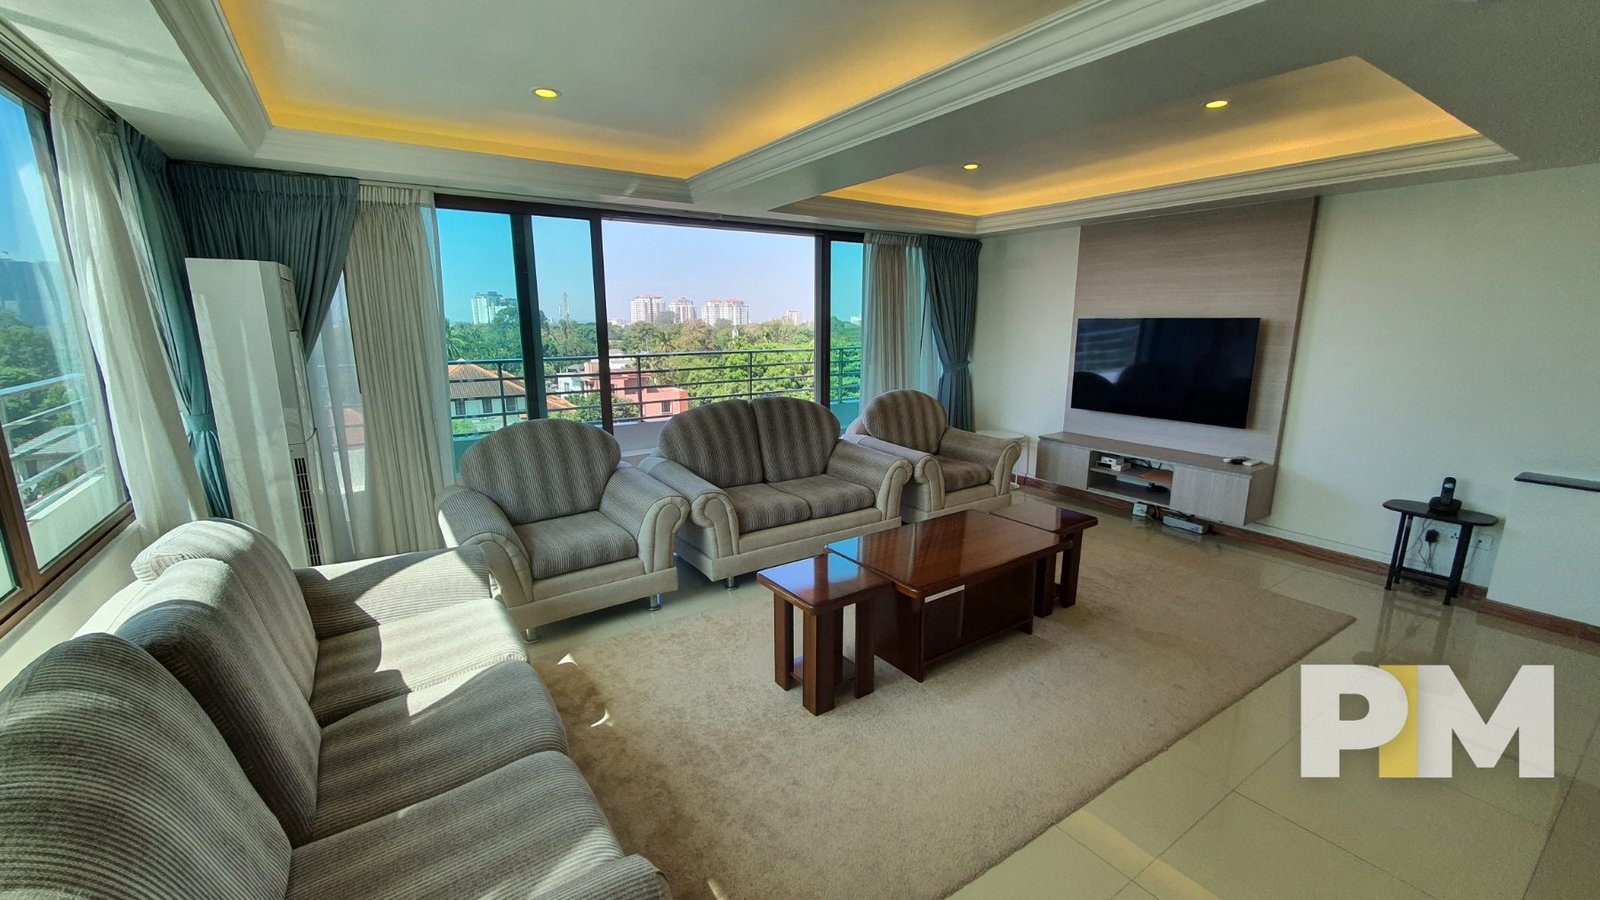 Penthouse for rent in myanmar